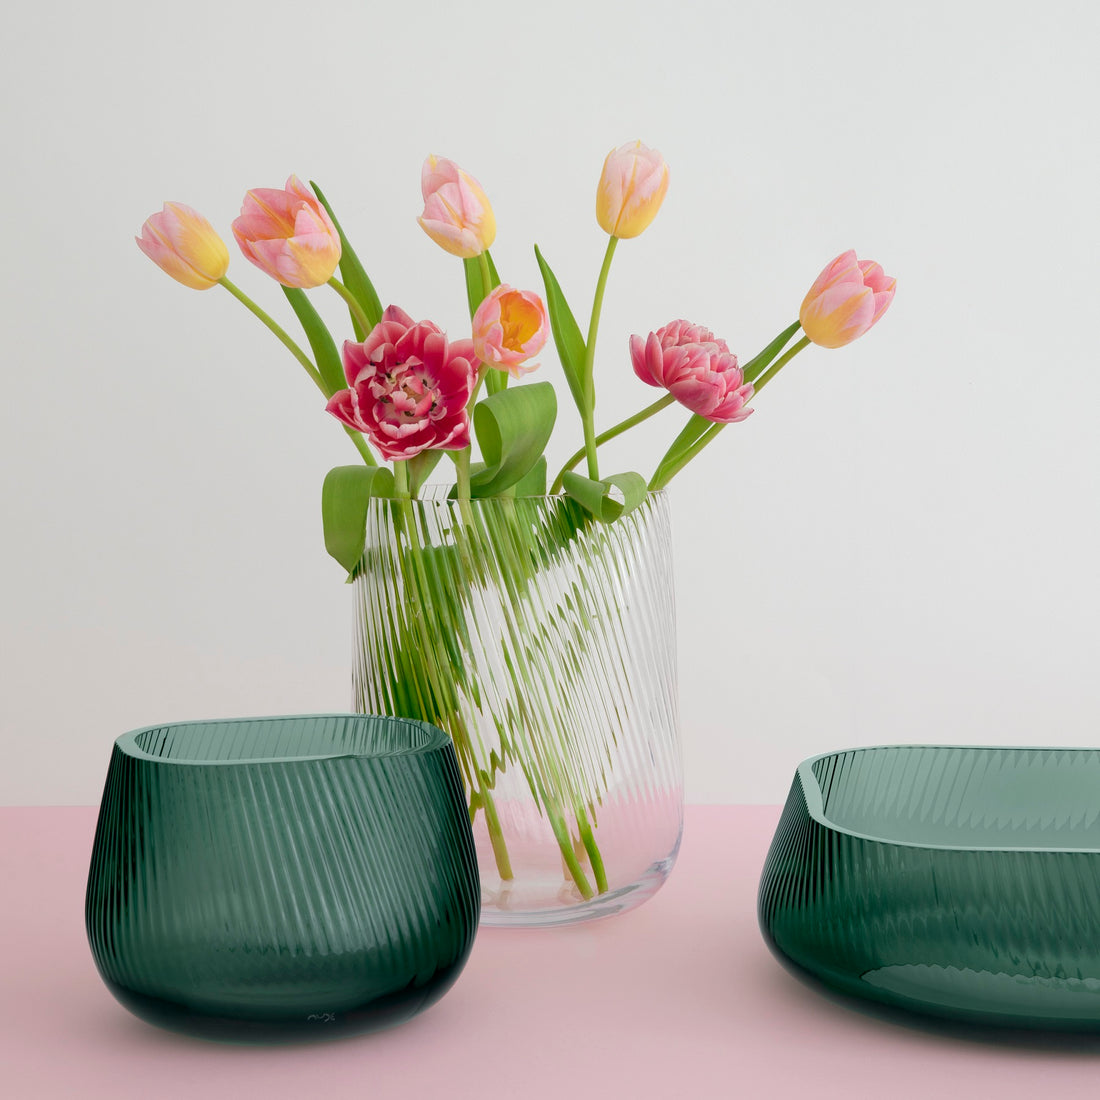 Group Opti vases by Defne Koz for NUDE